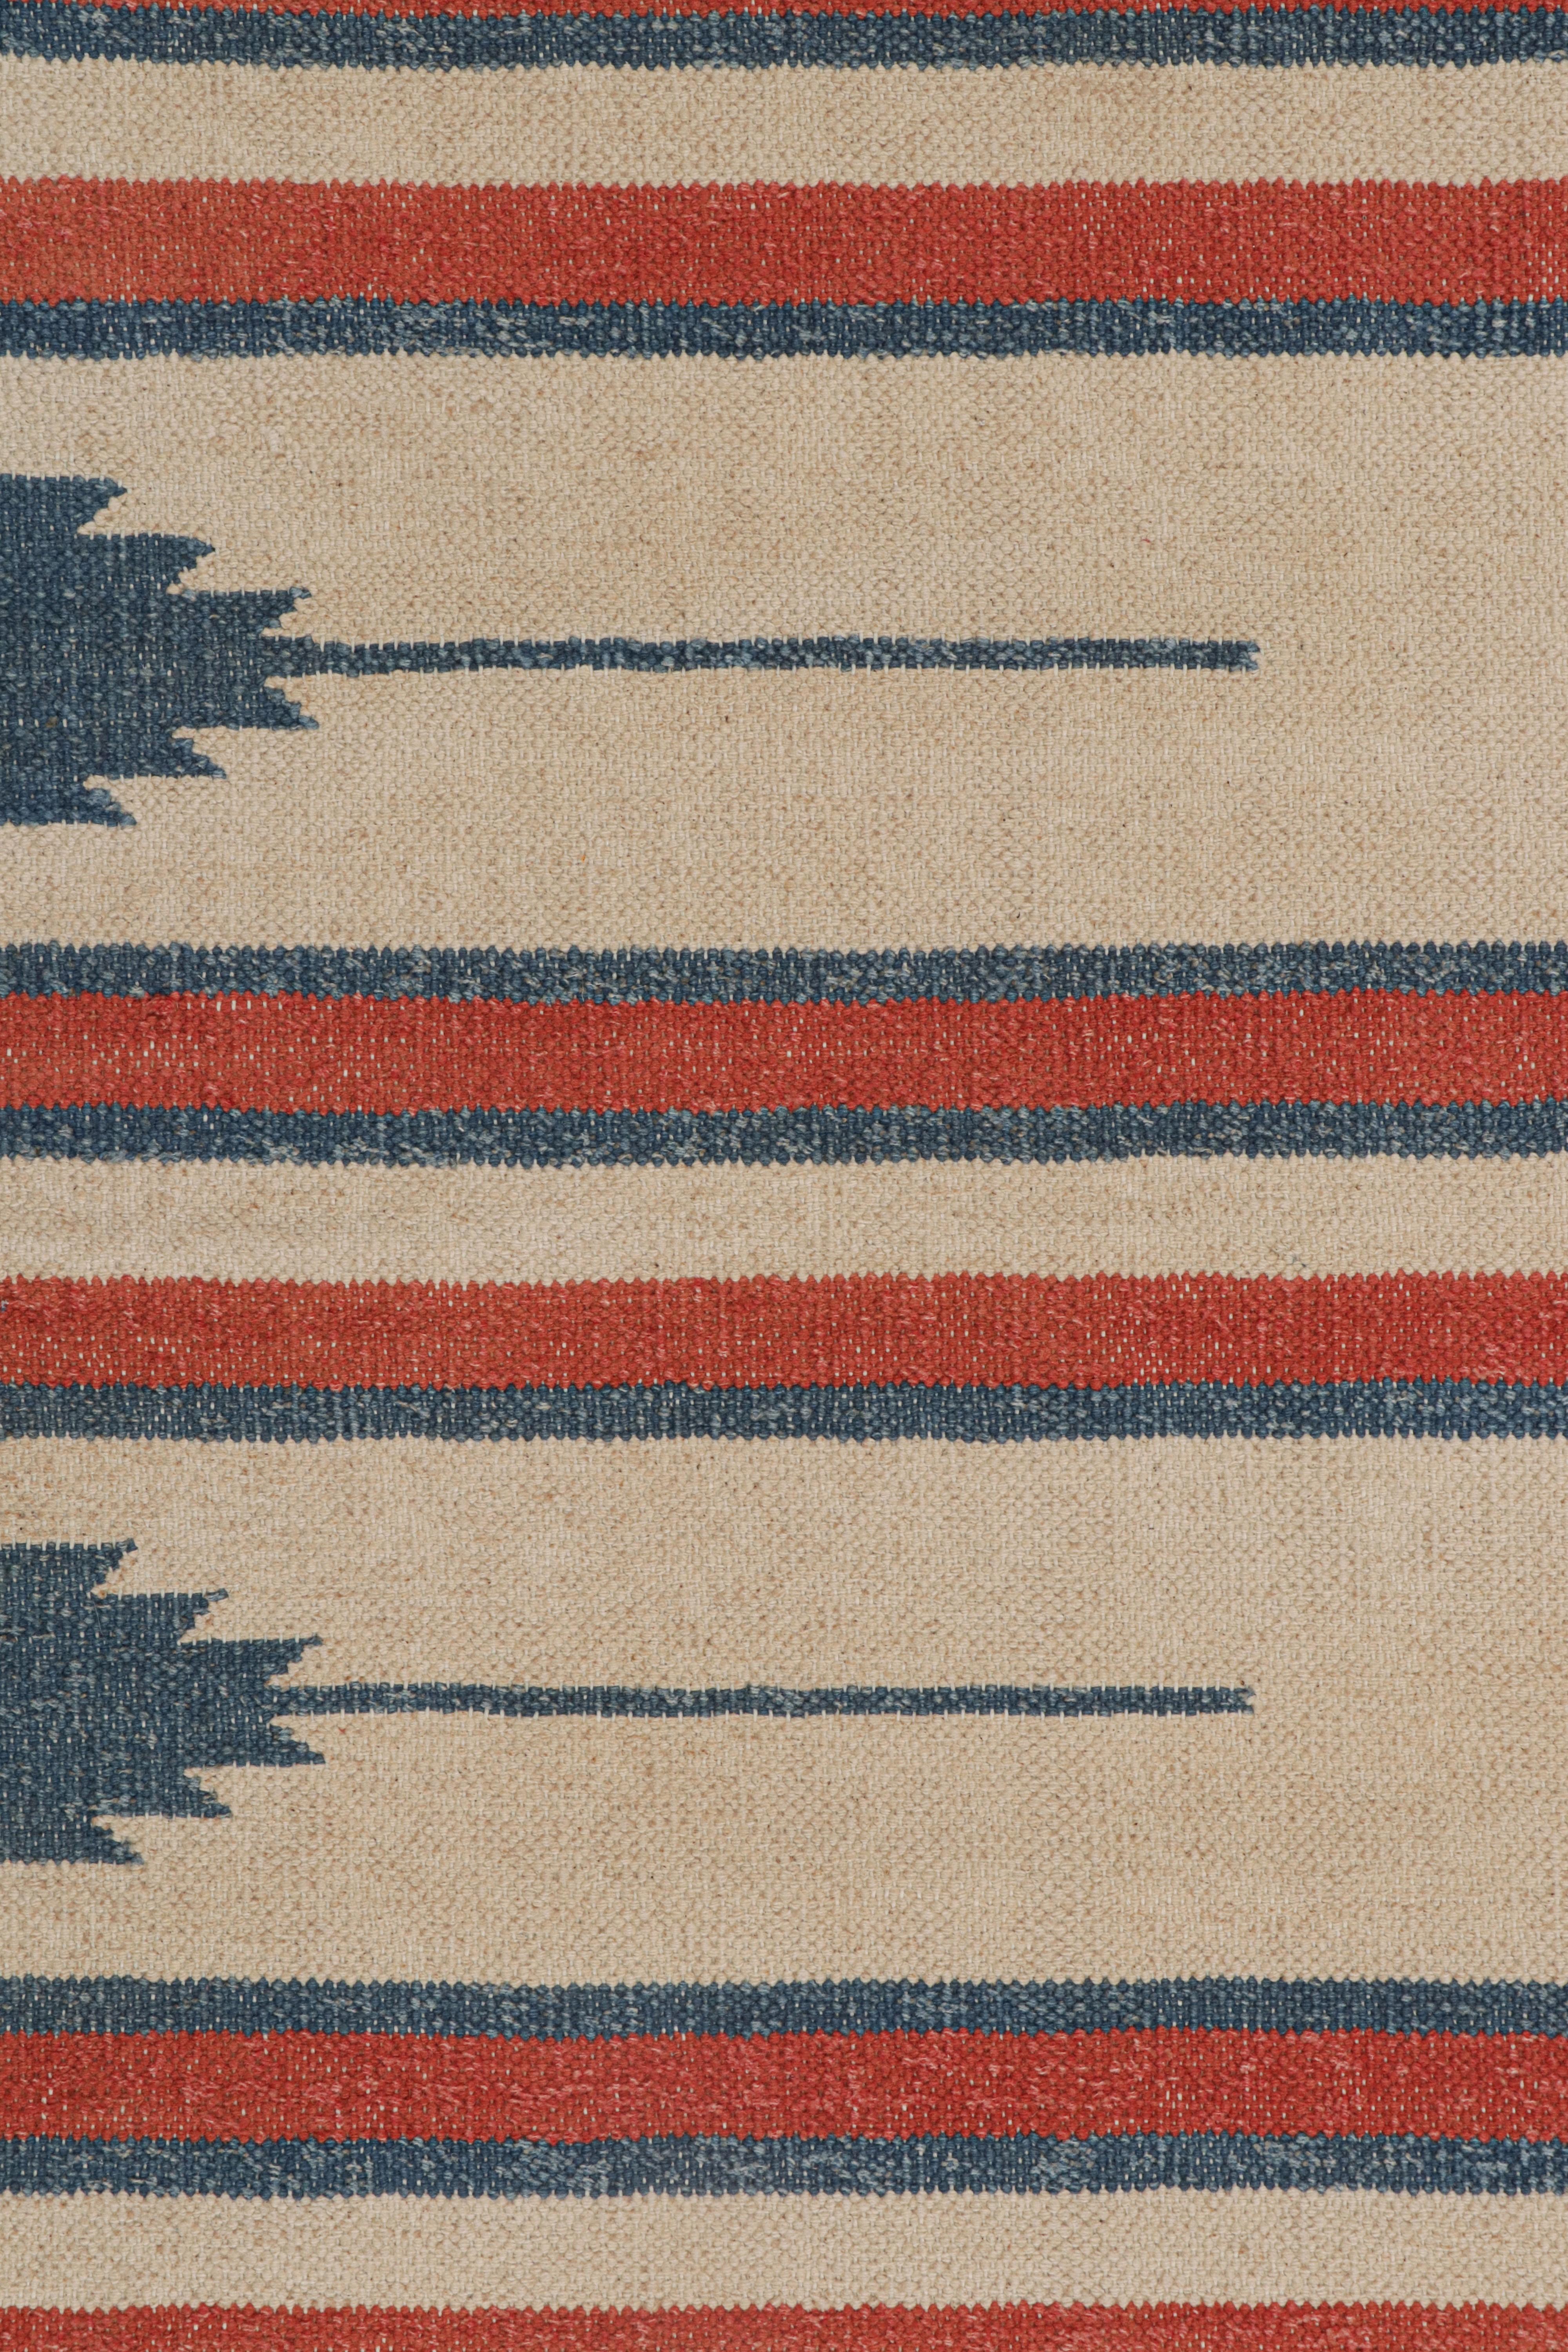 Moderne Rug & Kilim's Contemporary Dhurrie Rug with Beige, Red, Blue Stripes Red Accents (tapis contemporain en dhurrie avec des rayures beiges, rouges et bleues et des accents rouges) en vente